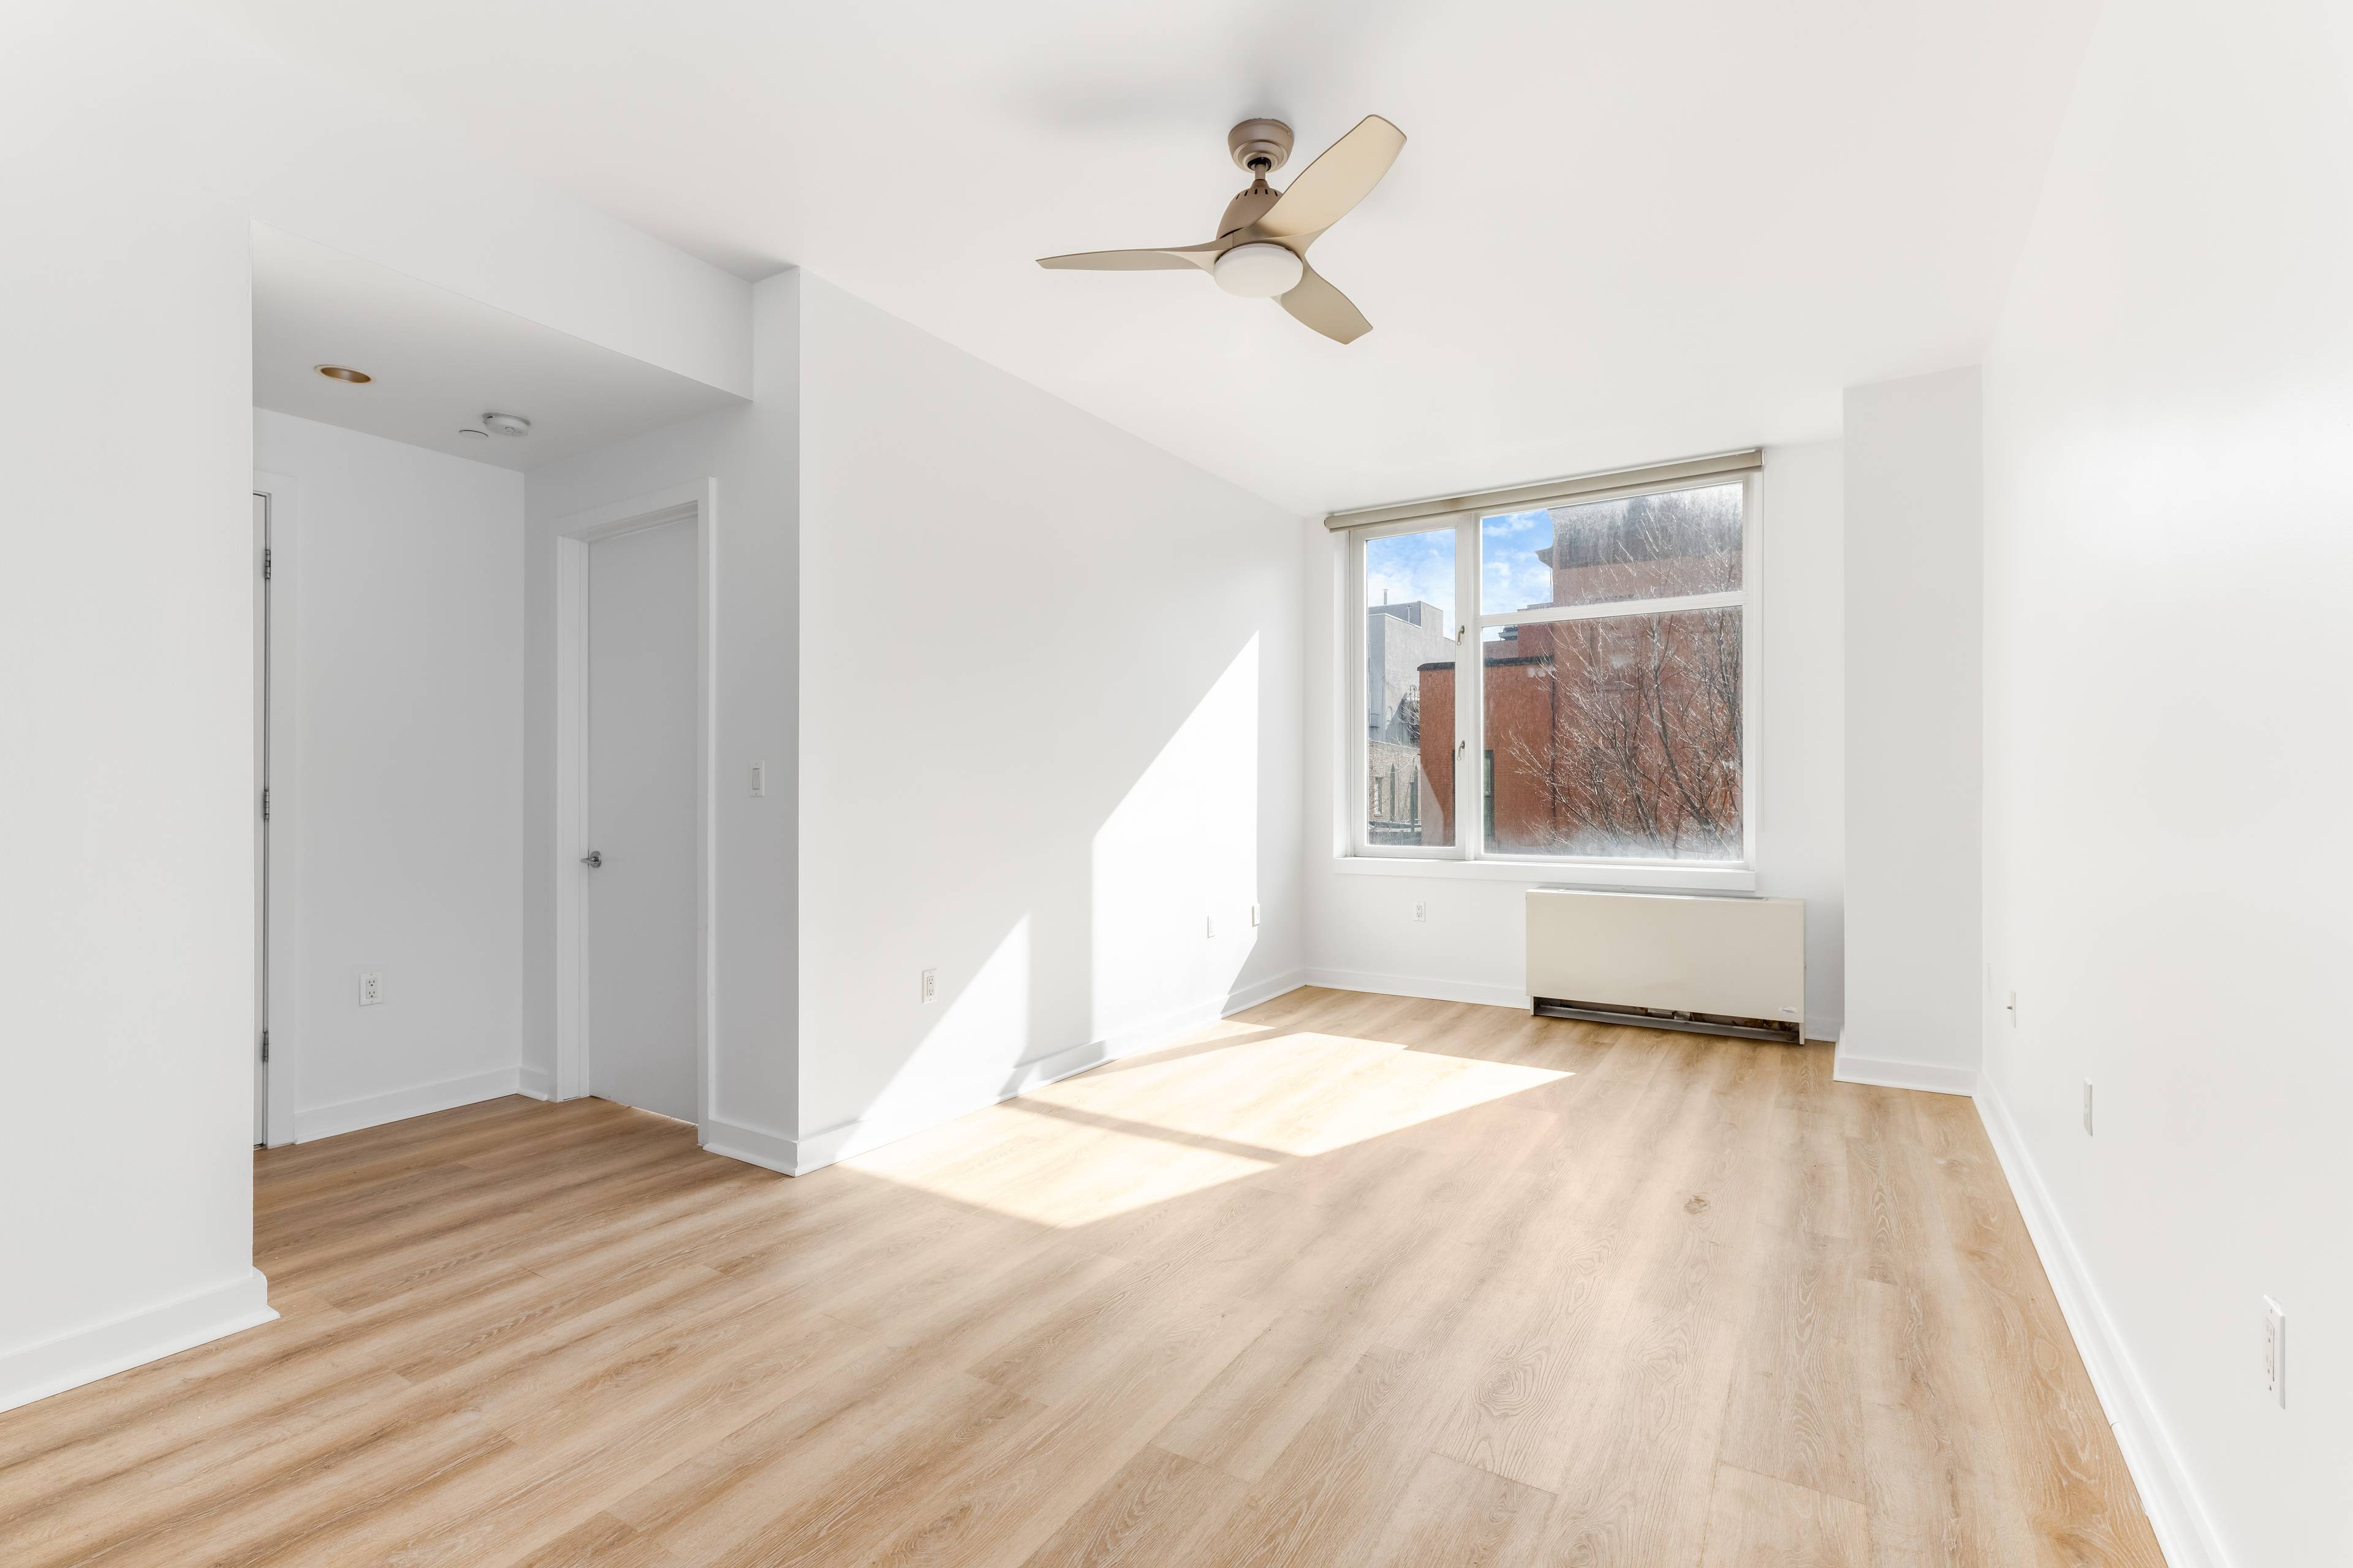 Natural light FILLS the interiors of this perfectly appointed 1 bedroom condo residence thanks to the high ceilings, lofty windows and shining white oak hardwood floors.